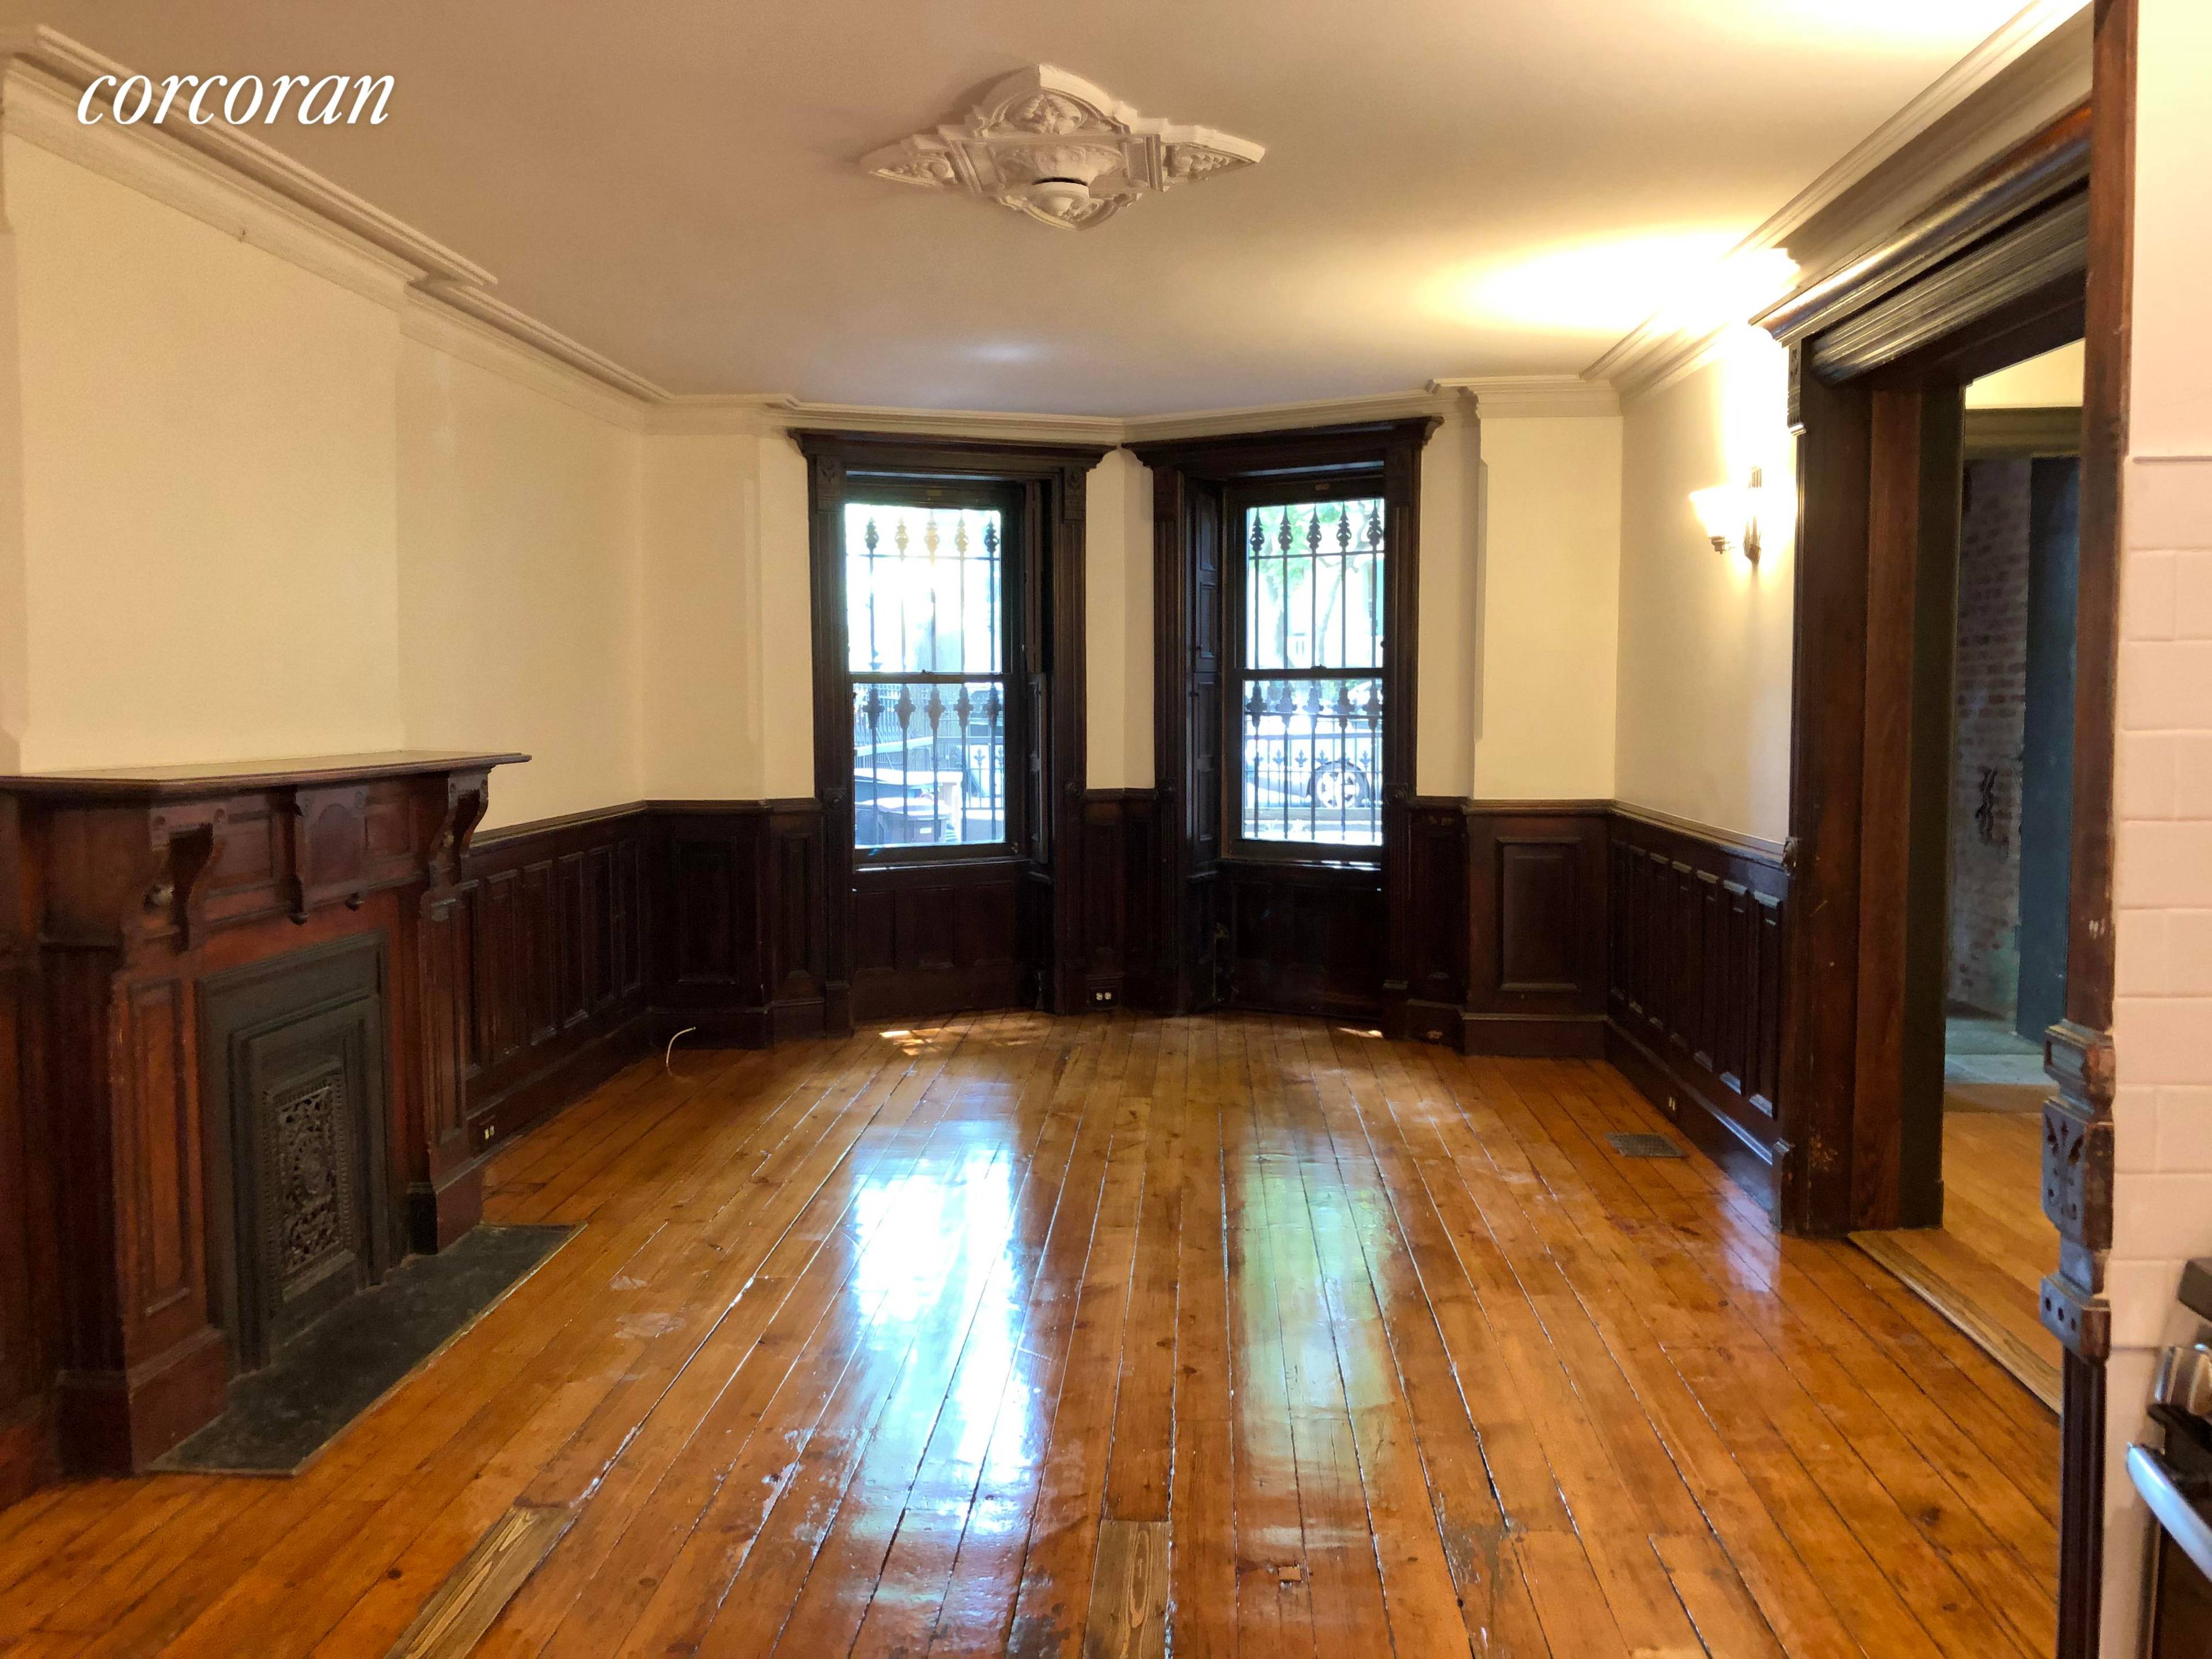 1000 sqft one bedroom den Garden apartmentGorgeous brownstone loaded with original details.